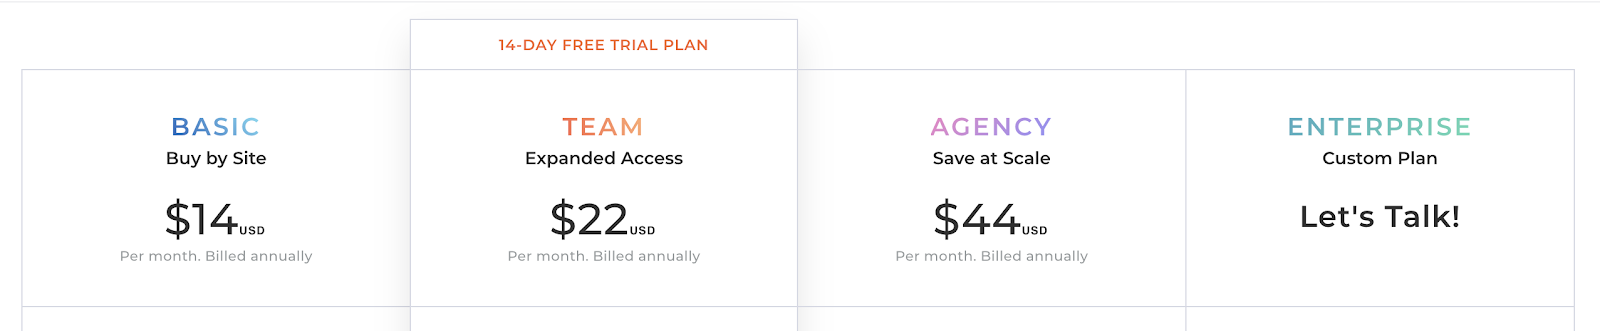 Duda Pricing and Plans Compared (Screenshot)